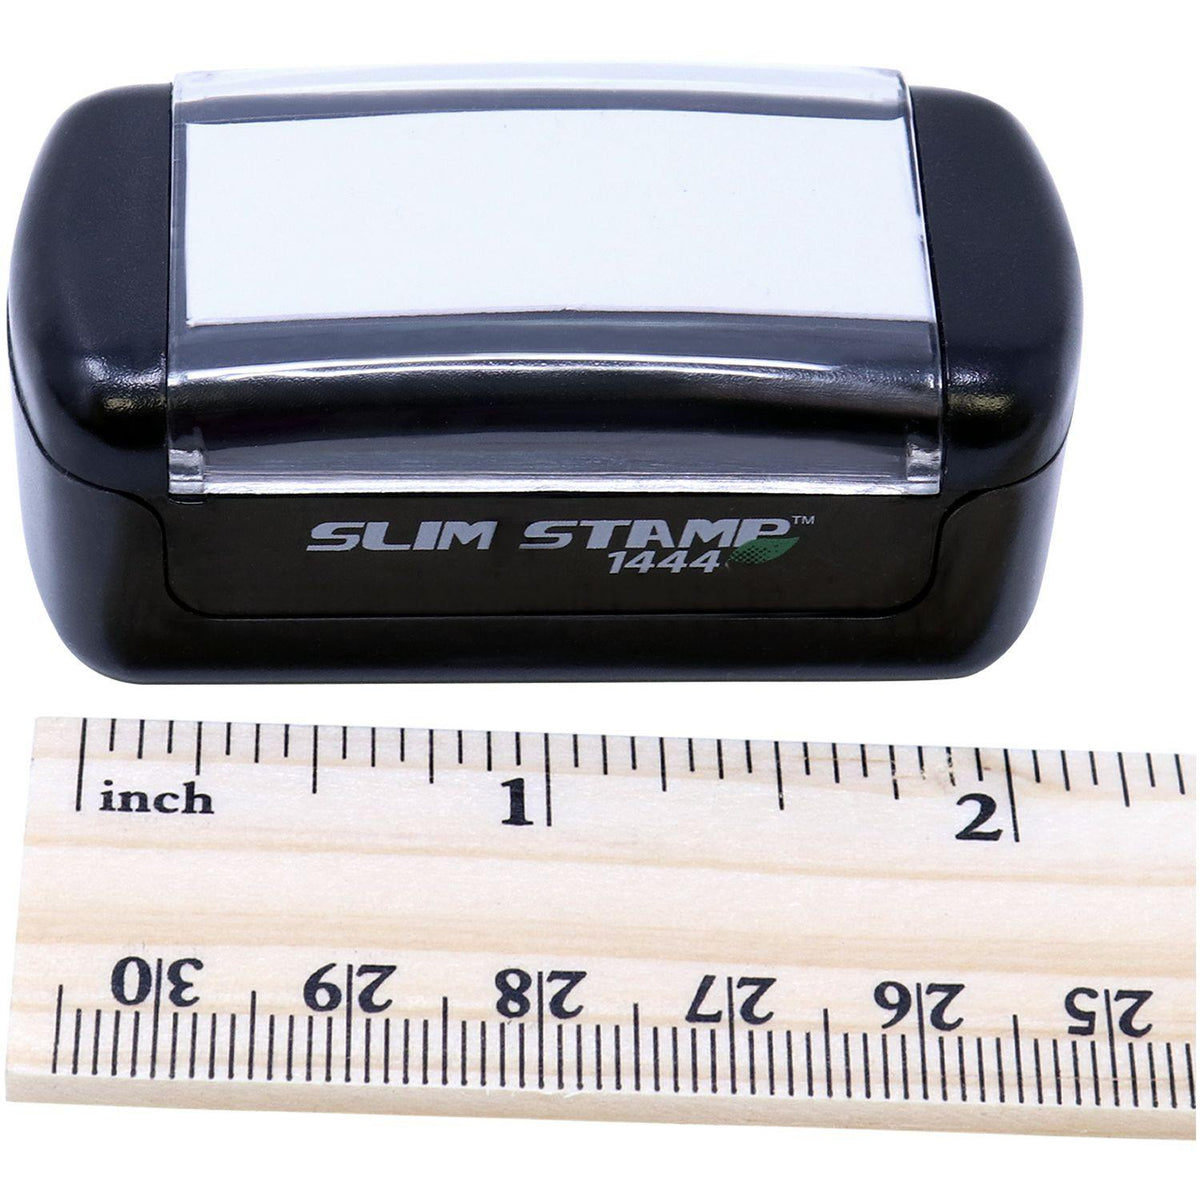 Measurement Slim Pre Inked Expert Witness Stamp with Ruler